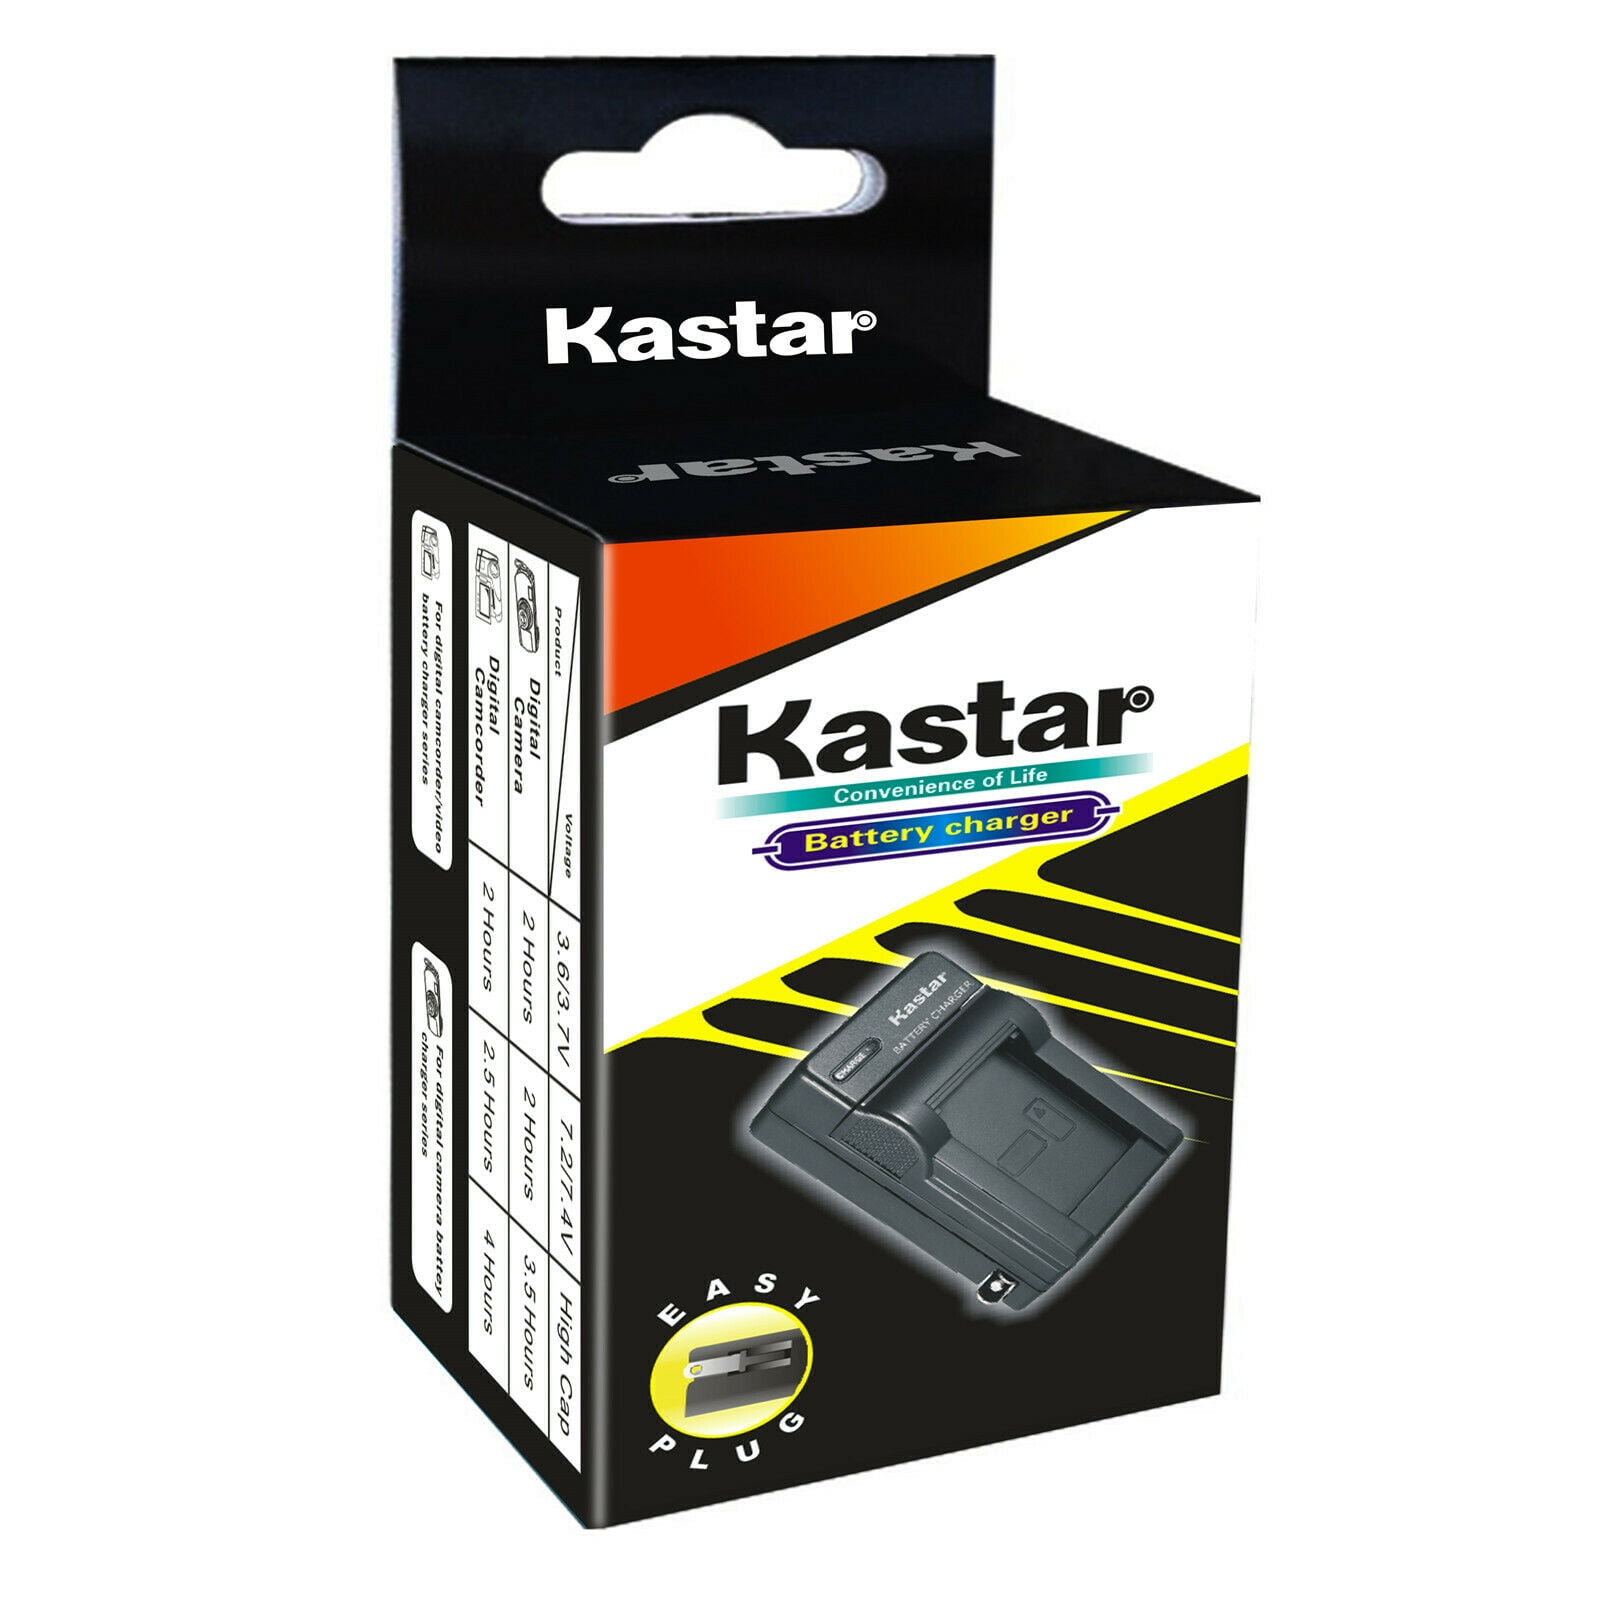 Kastar AC Wall Battery Charger Replacement for Fujifilm NP NP